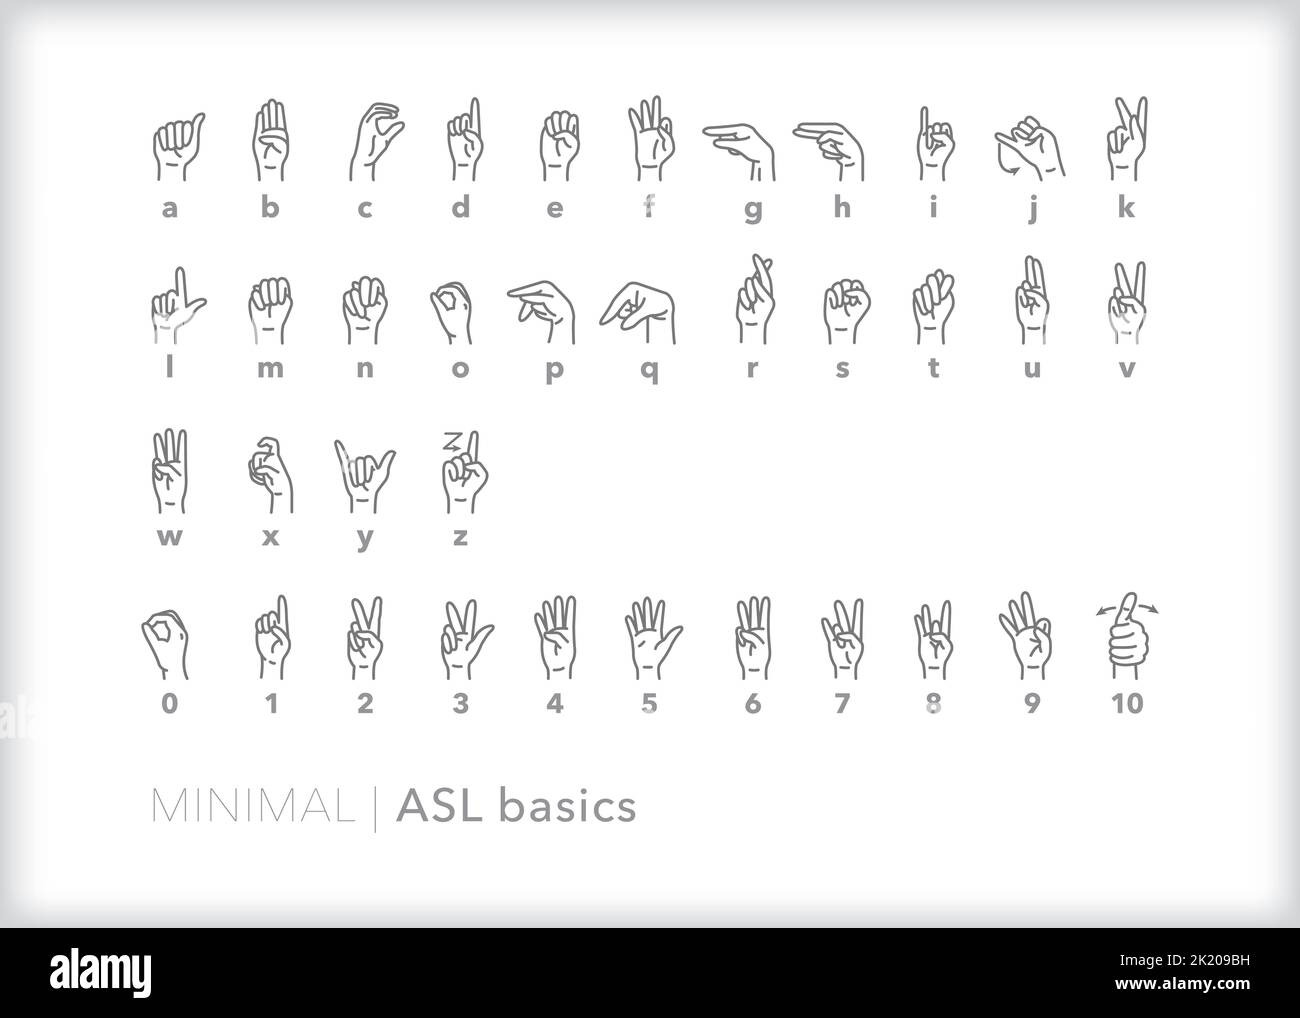 Set of American Sign Language (ASL) alphabet letter and number icons for learning how to communicate through signing Stock Vector